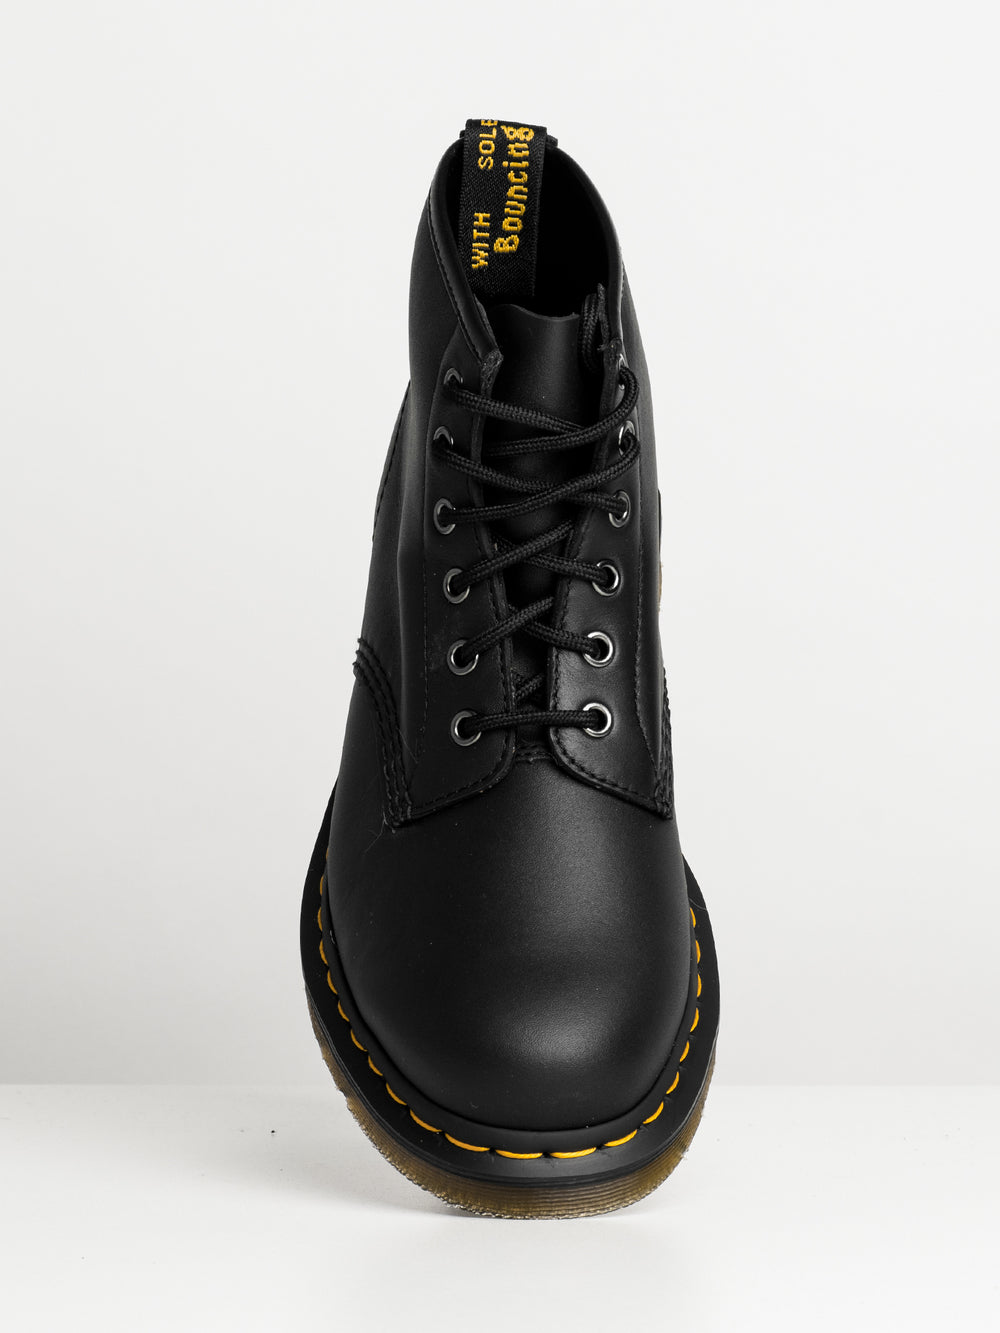 DR MARTENS 101 NAPPA BOOT - CLEARANCE